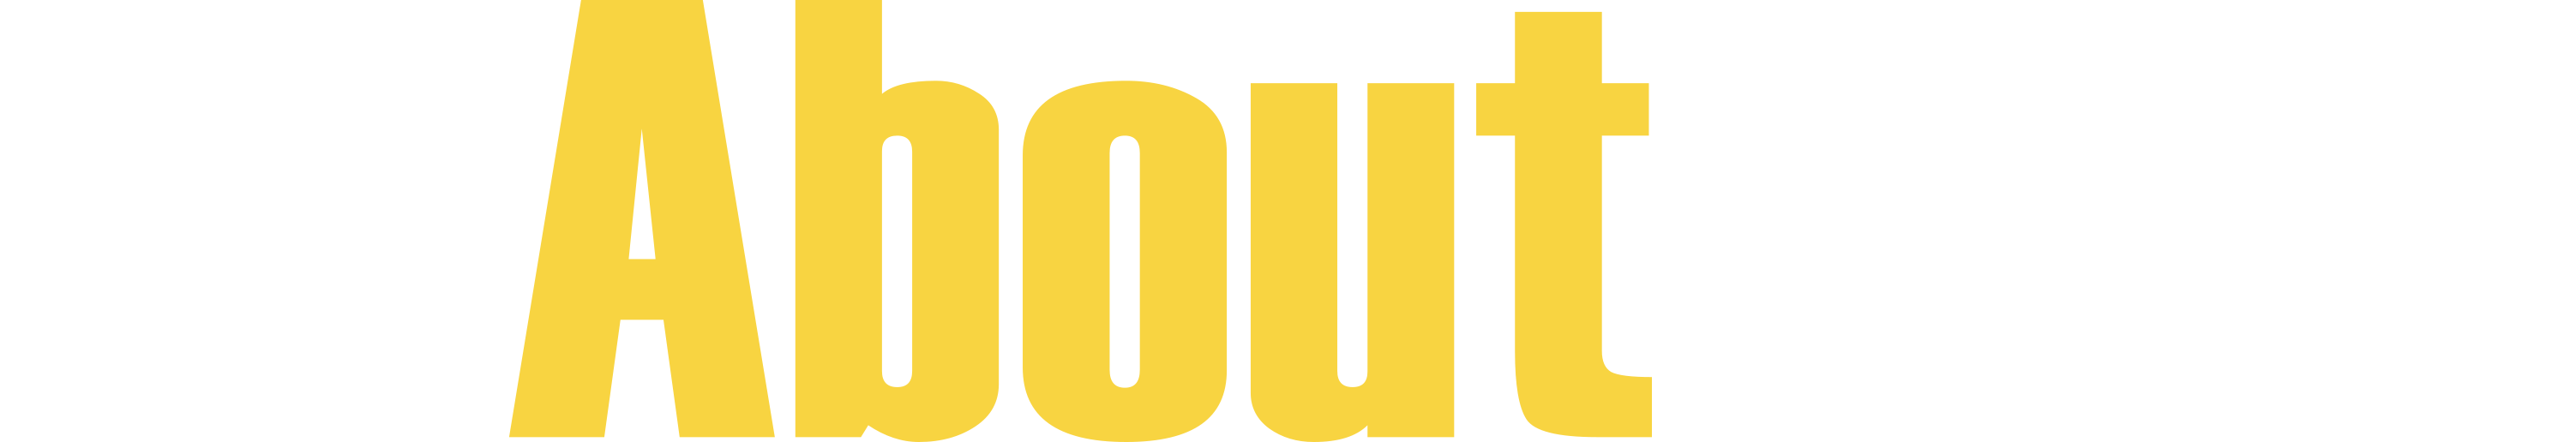 Transparent All About Jazz banner - Yellow